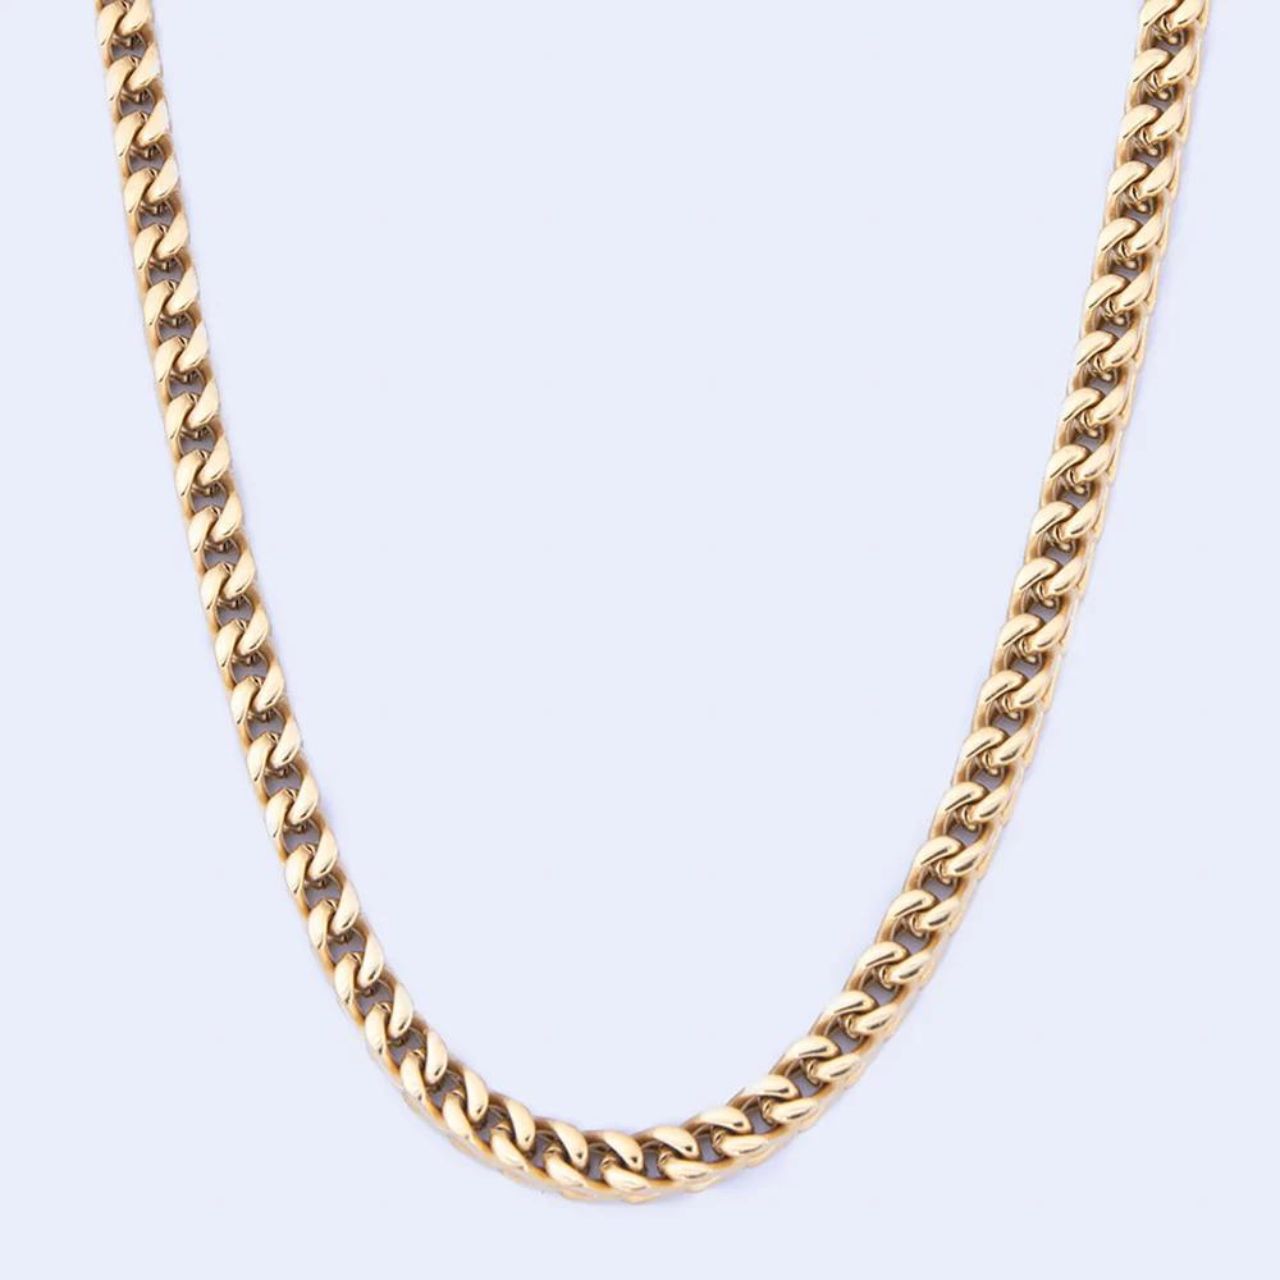 Knight & Day Curb Chain Necklace  Elegant curb chain necklace. Length 48.5cm with adjustable 7.5cm slider.  14k gold plating.